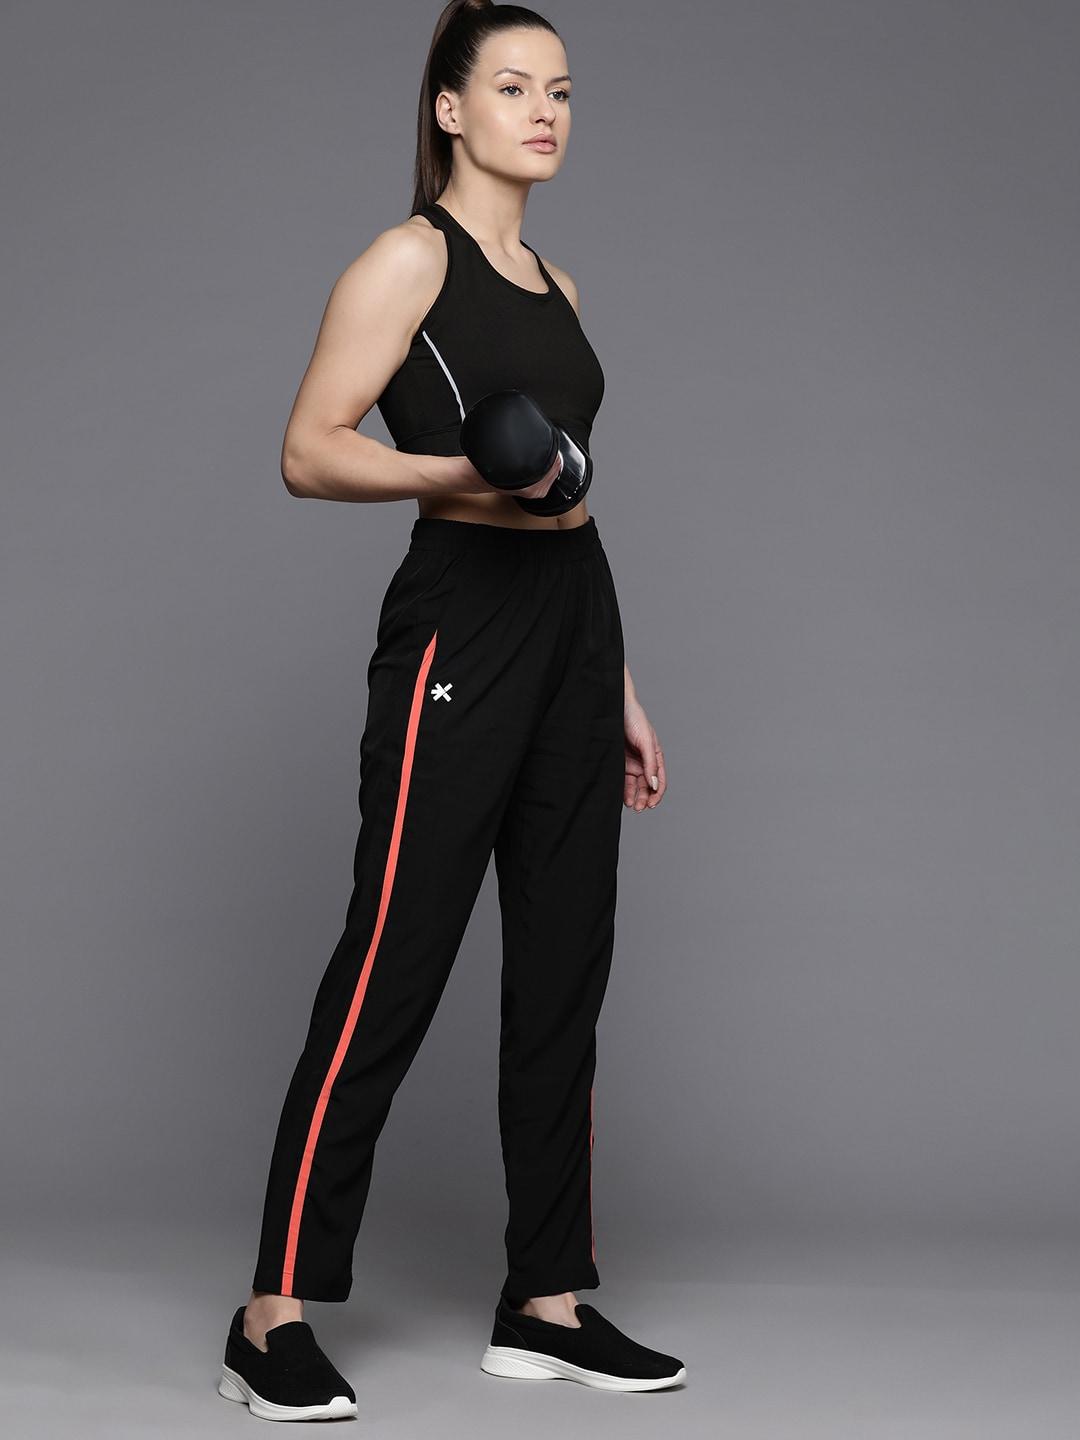 hrx-by-hrithik-roshan-women-rapid-dry-training-track-pants-with-reflective-detail